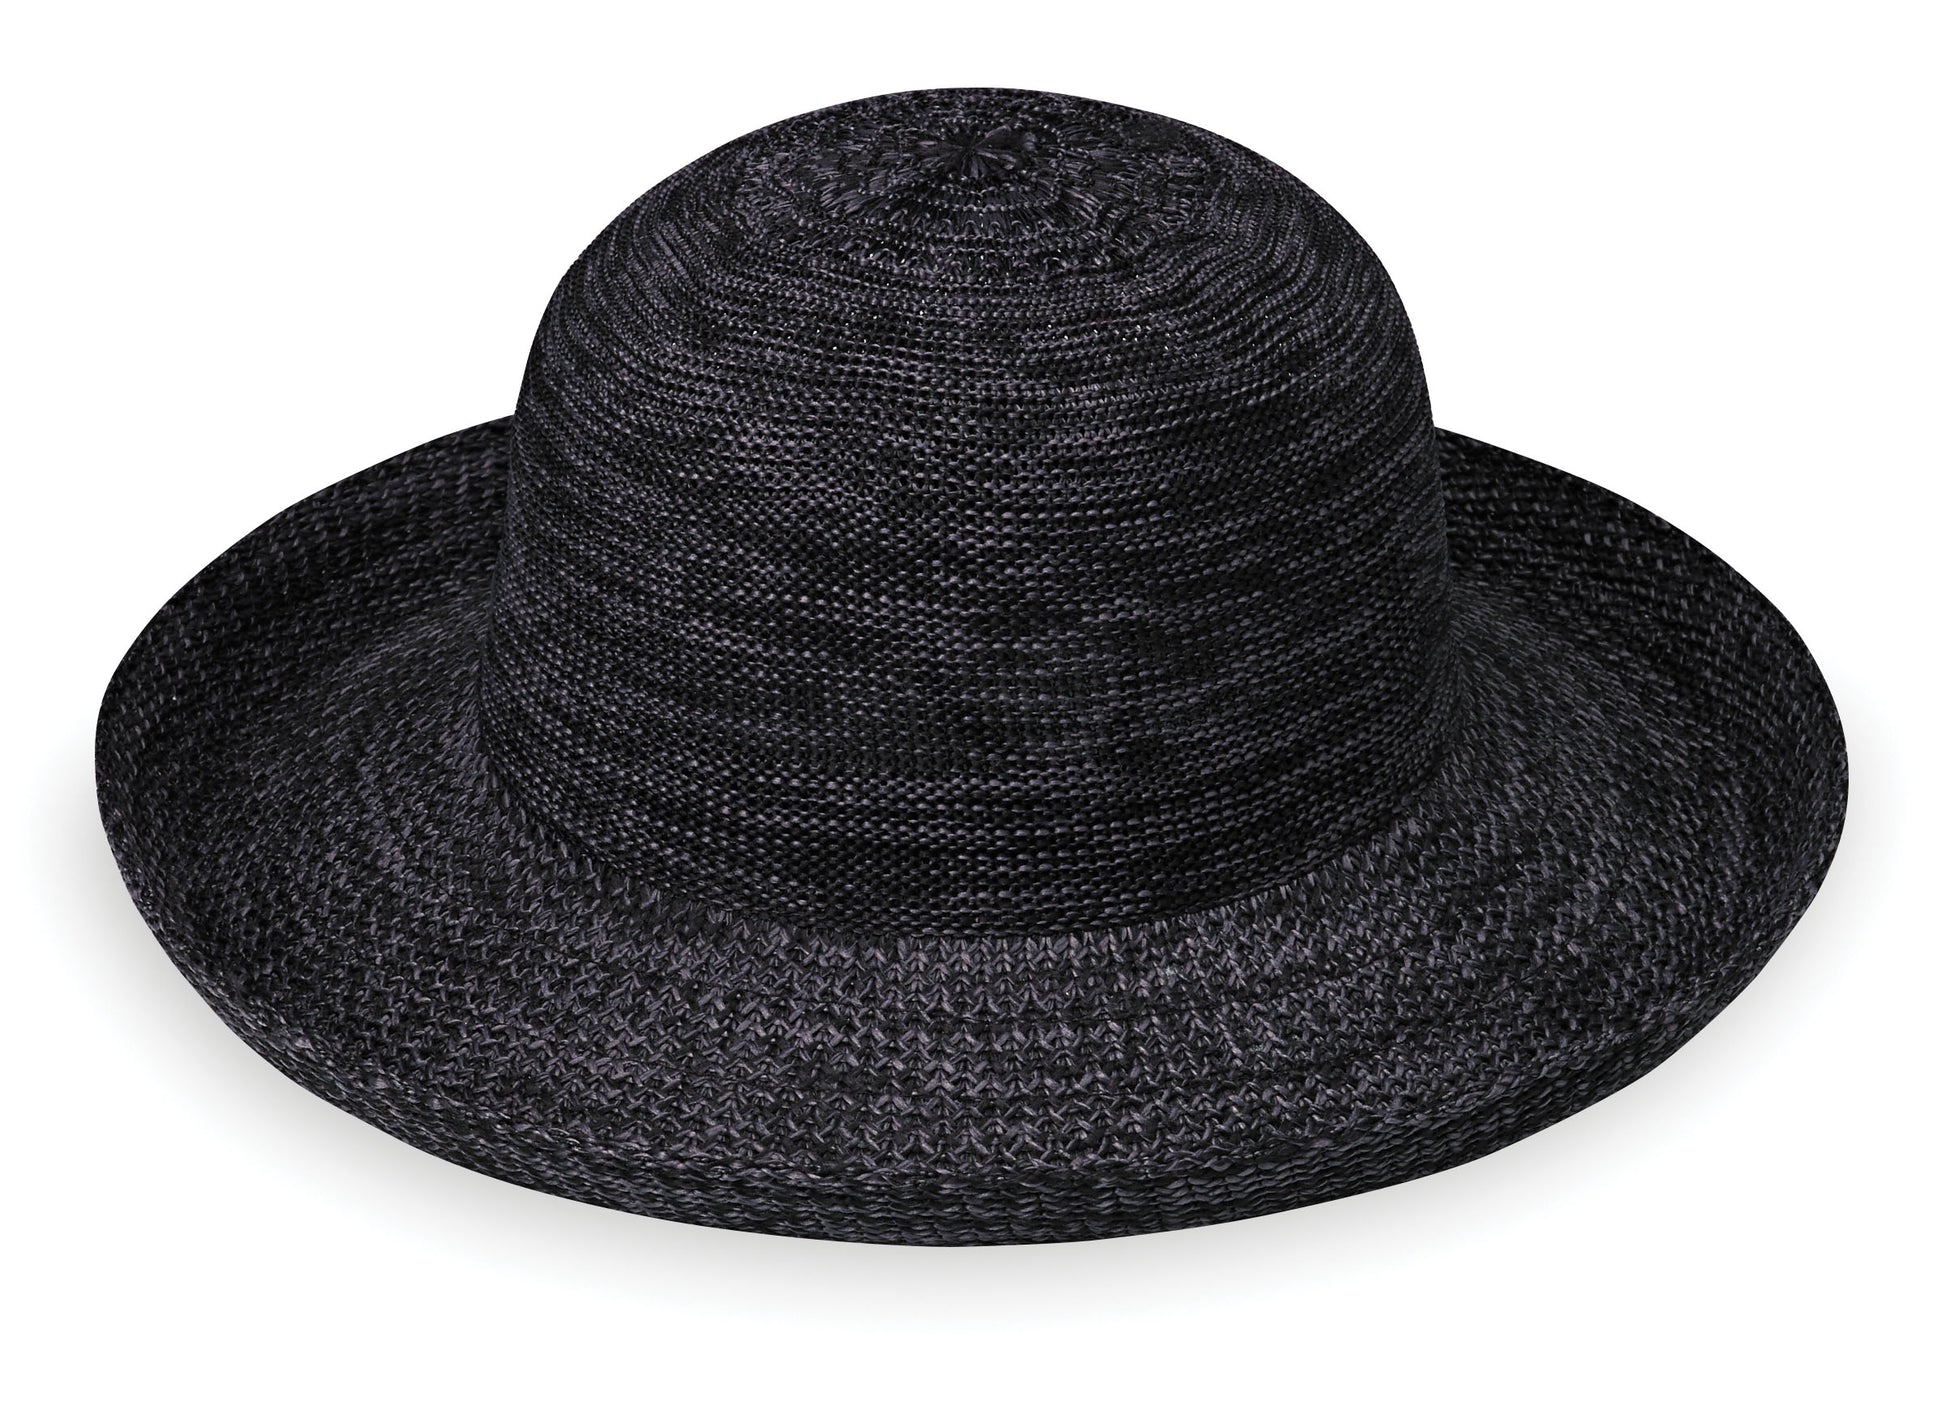 This packable black beach hat not only offers UPF 50+ sun protection but is also recommended by the Skin Cancer Foundation. Its wide brim ensures stylish sun coverage, making it a travel-friendly and fashionable addition to your personal fashion collection.